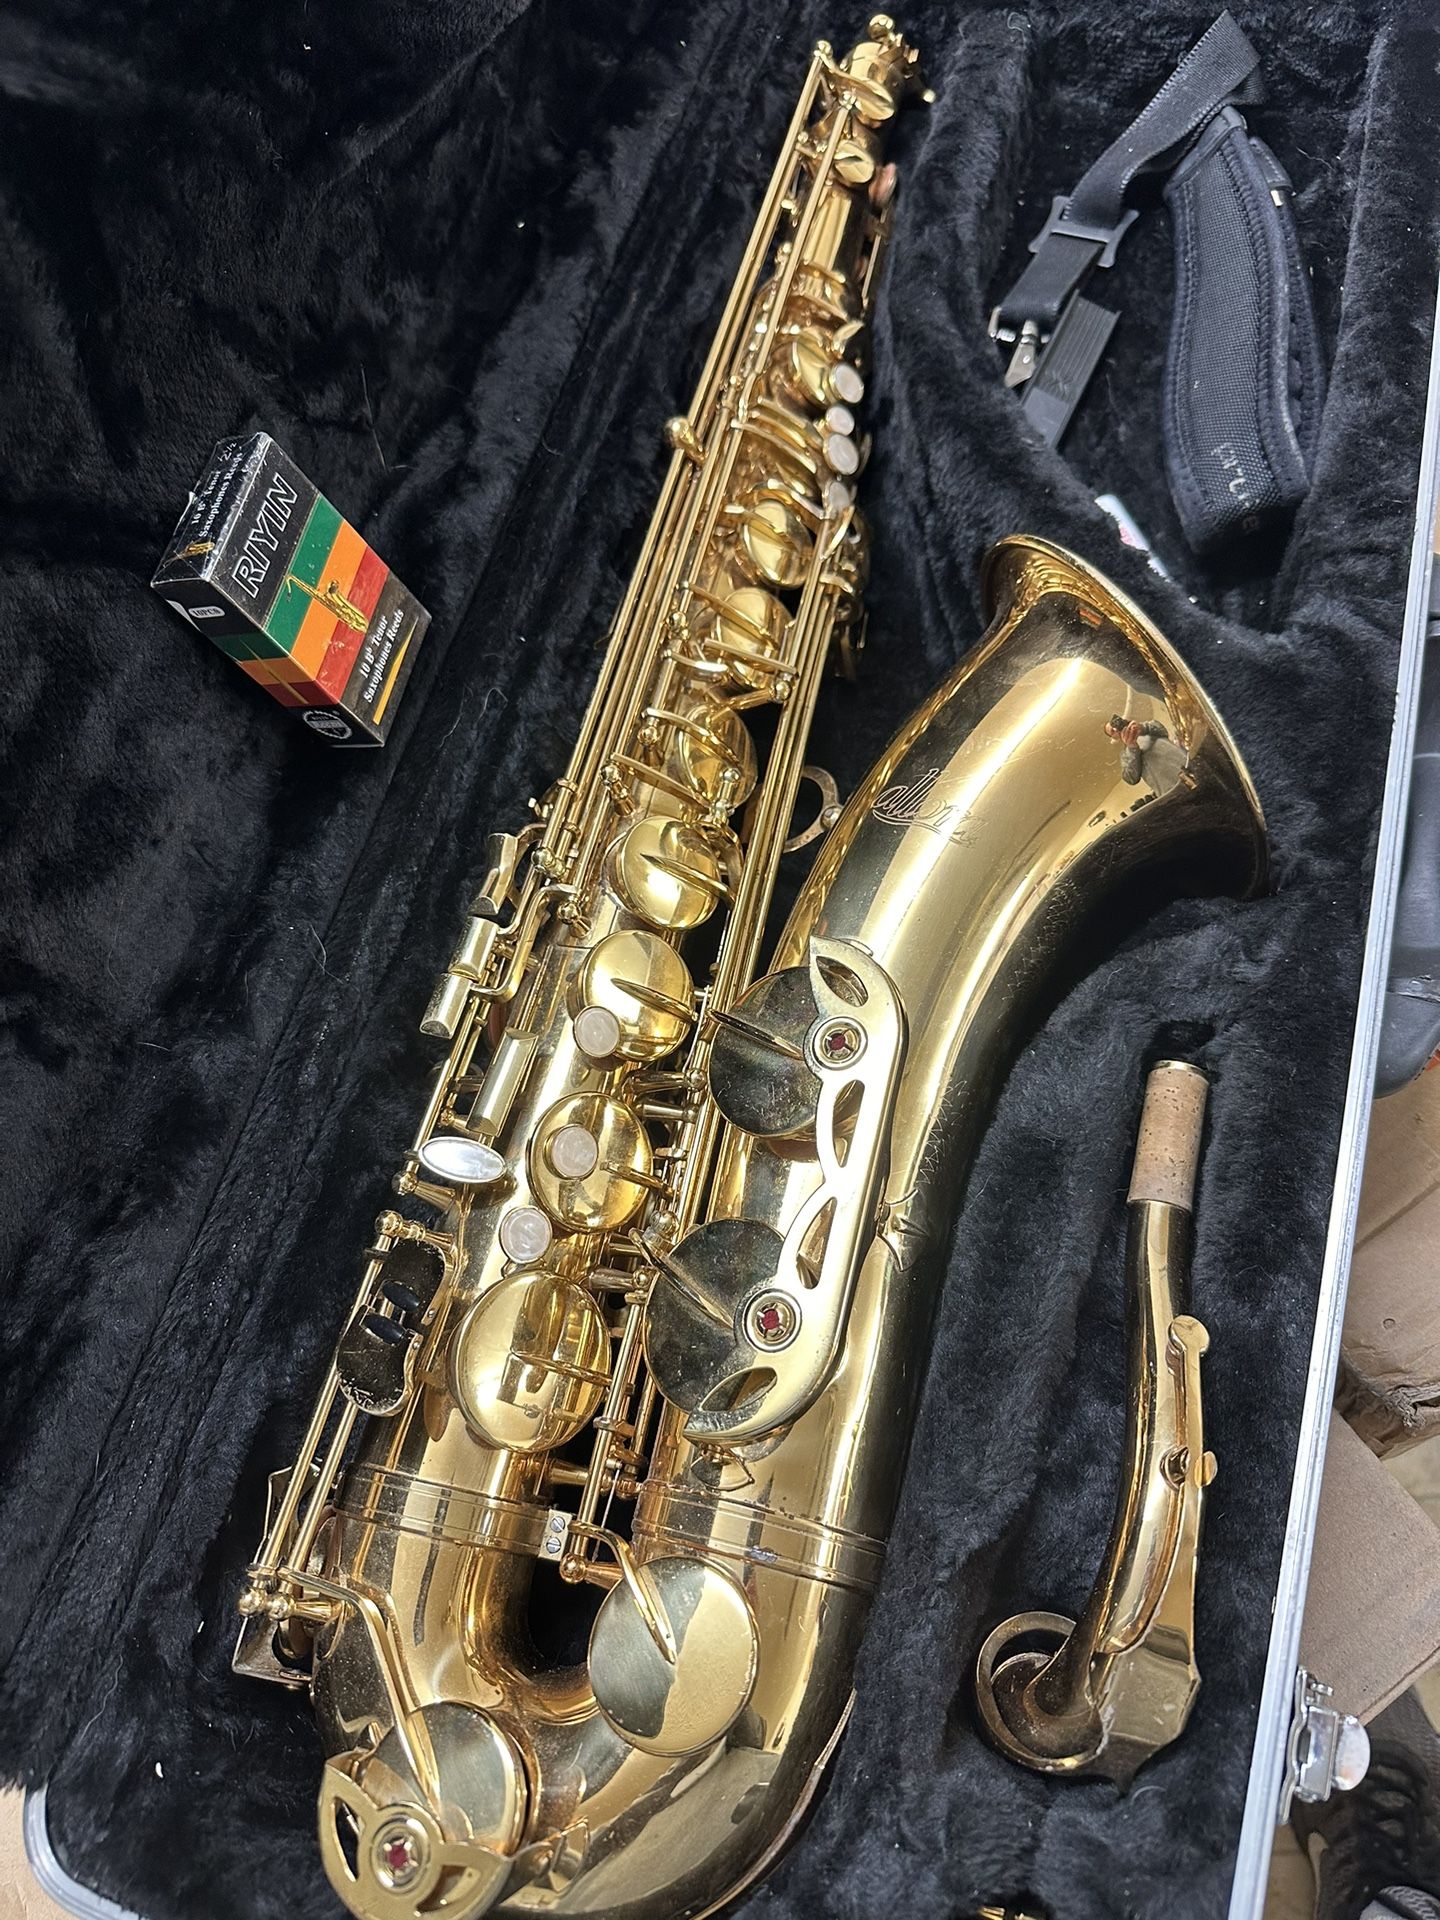 Allora TENOR Saxophone with New Box of Reeds $700 Firm